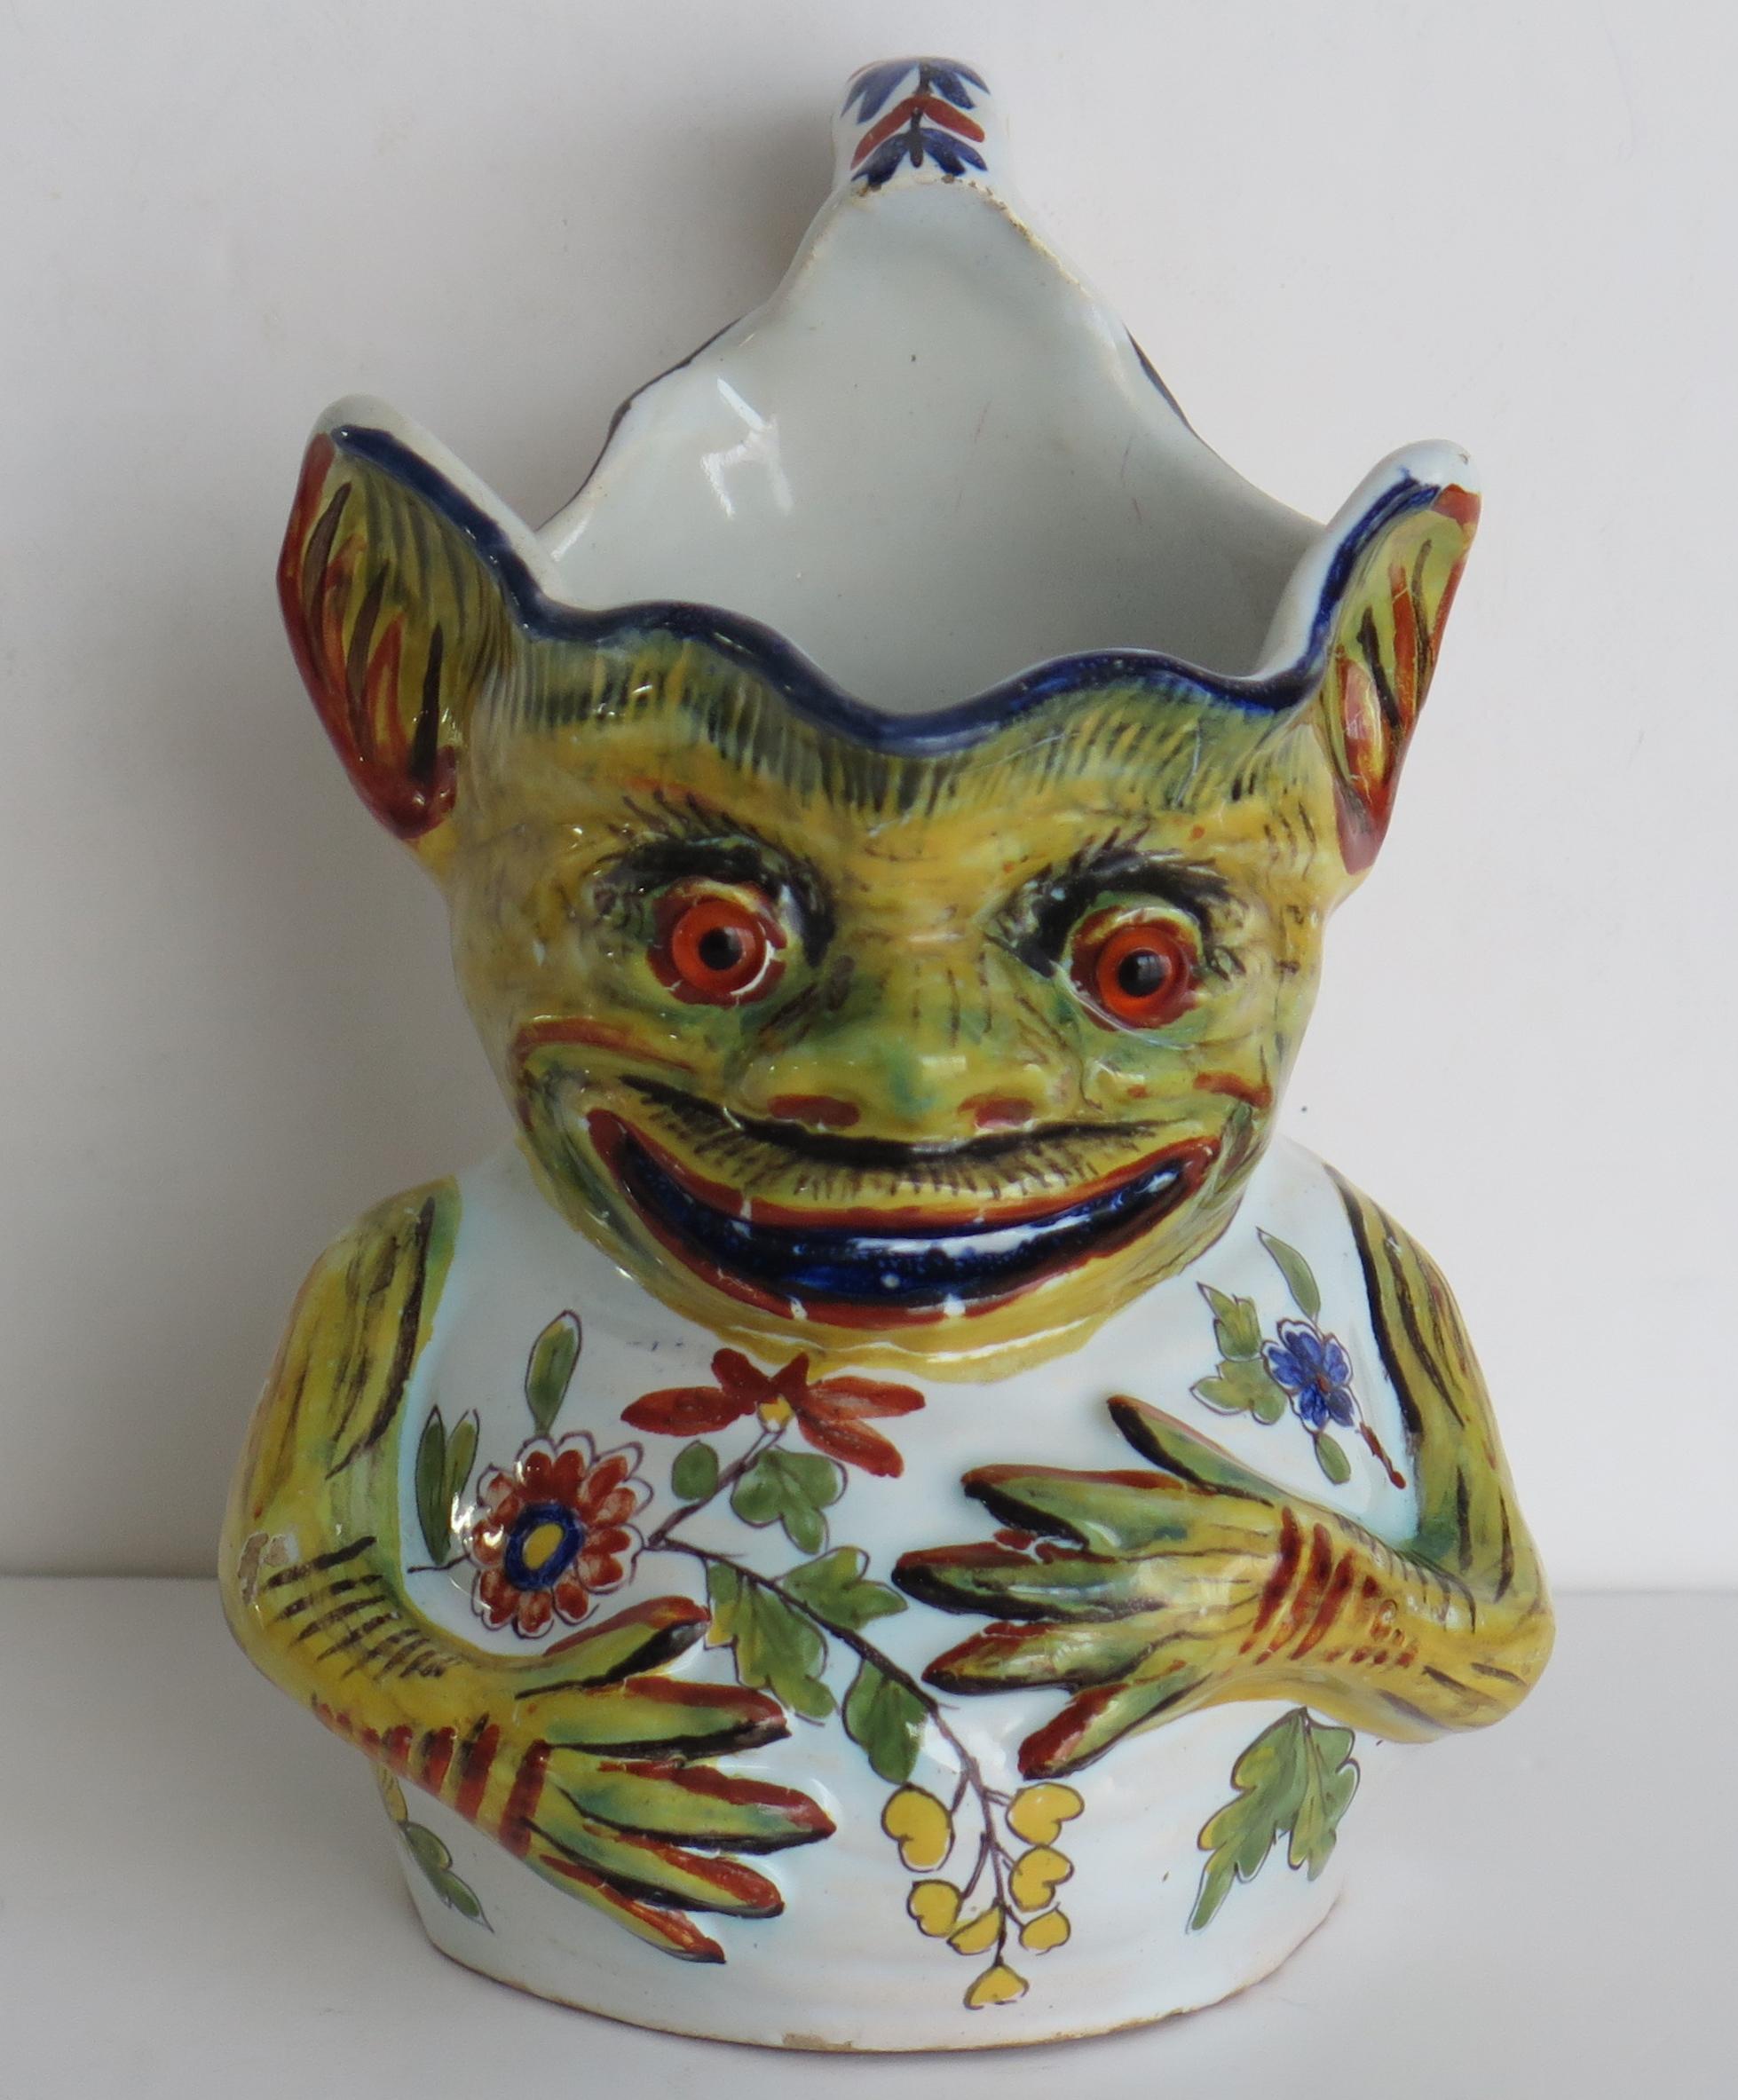 19th Century Antique French Faience Handpainted Grotesque Jug, Ca 1850